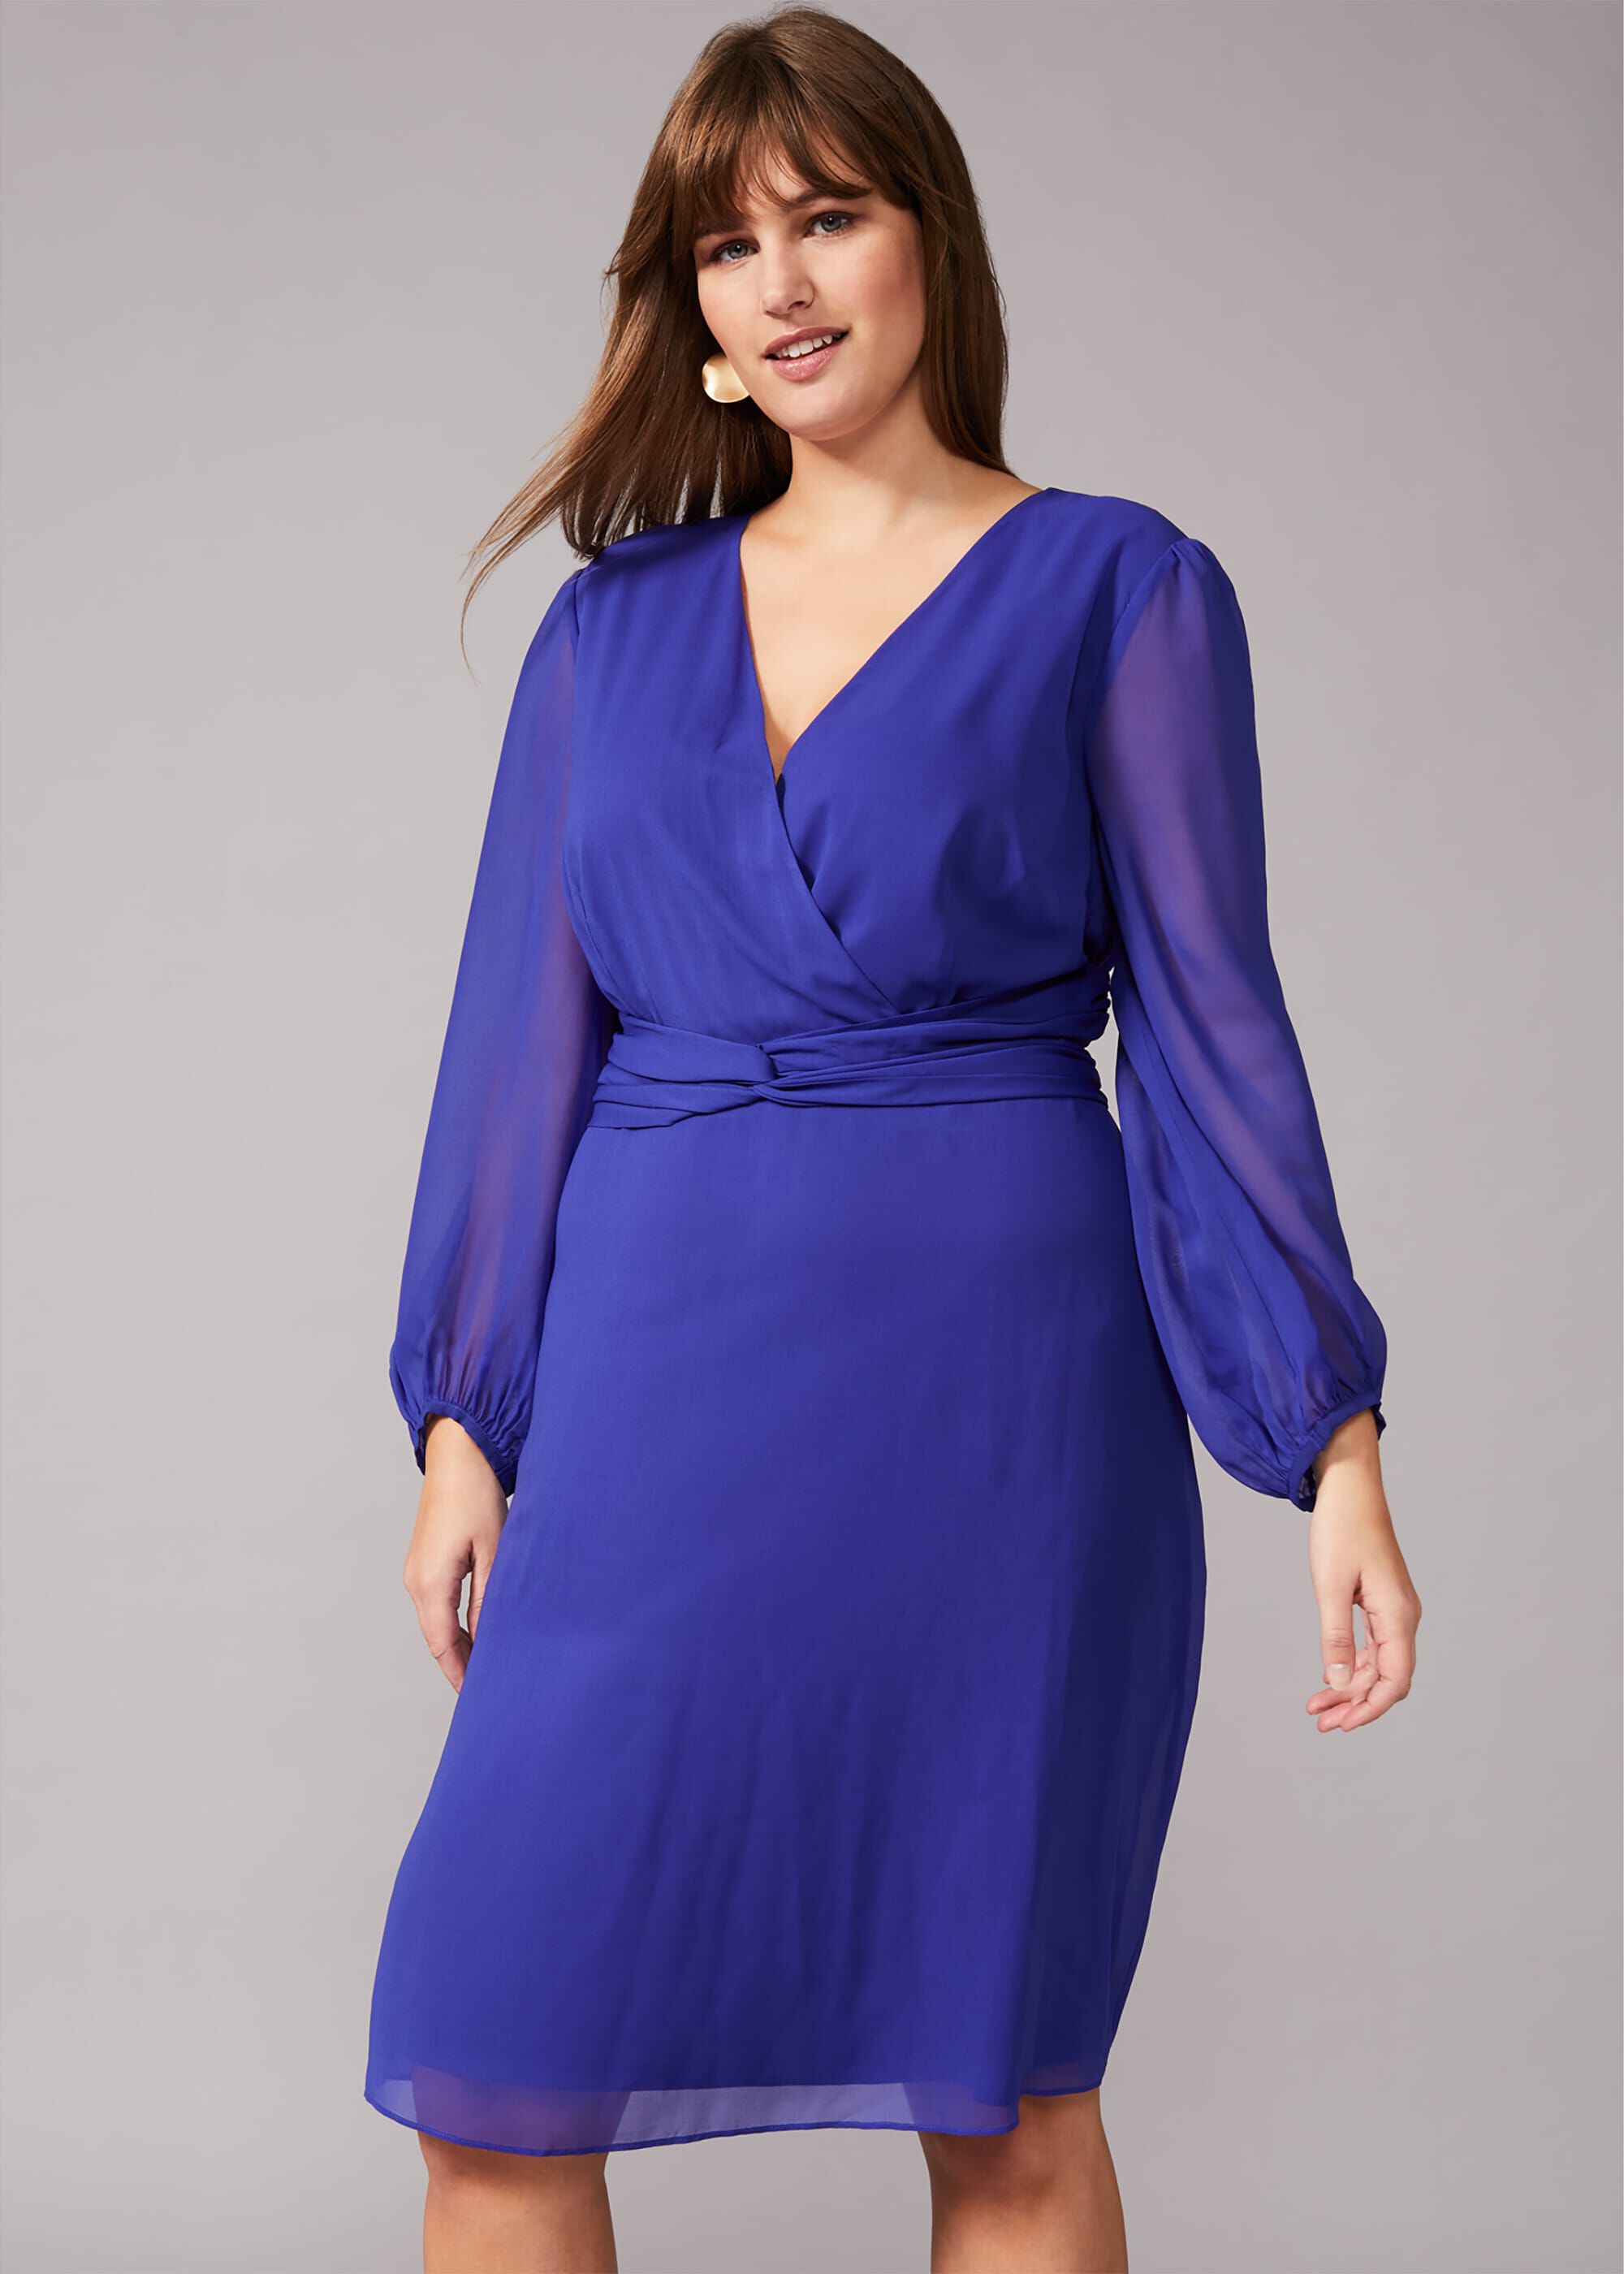 Phase Eight Plus Size Top Sellers, UP TO 66% OFF | www 